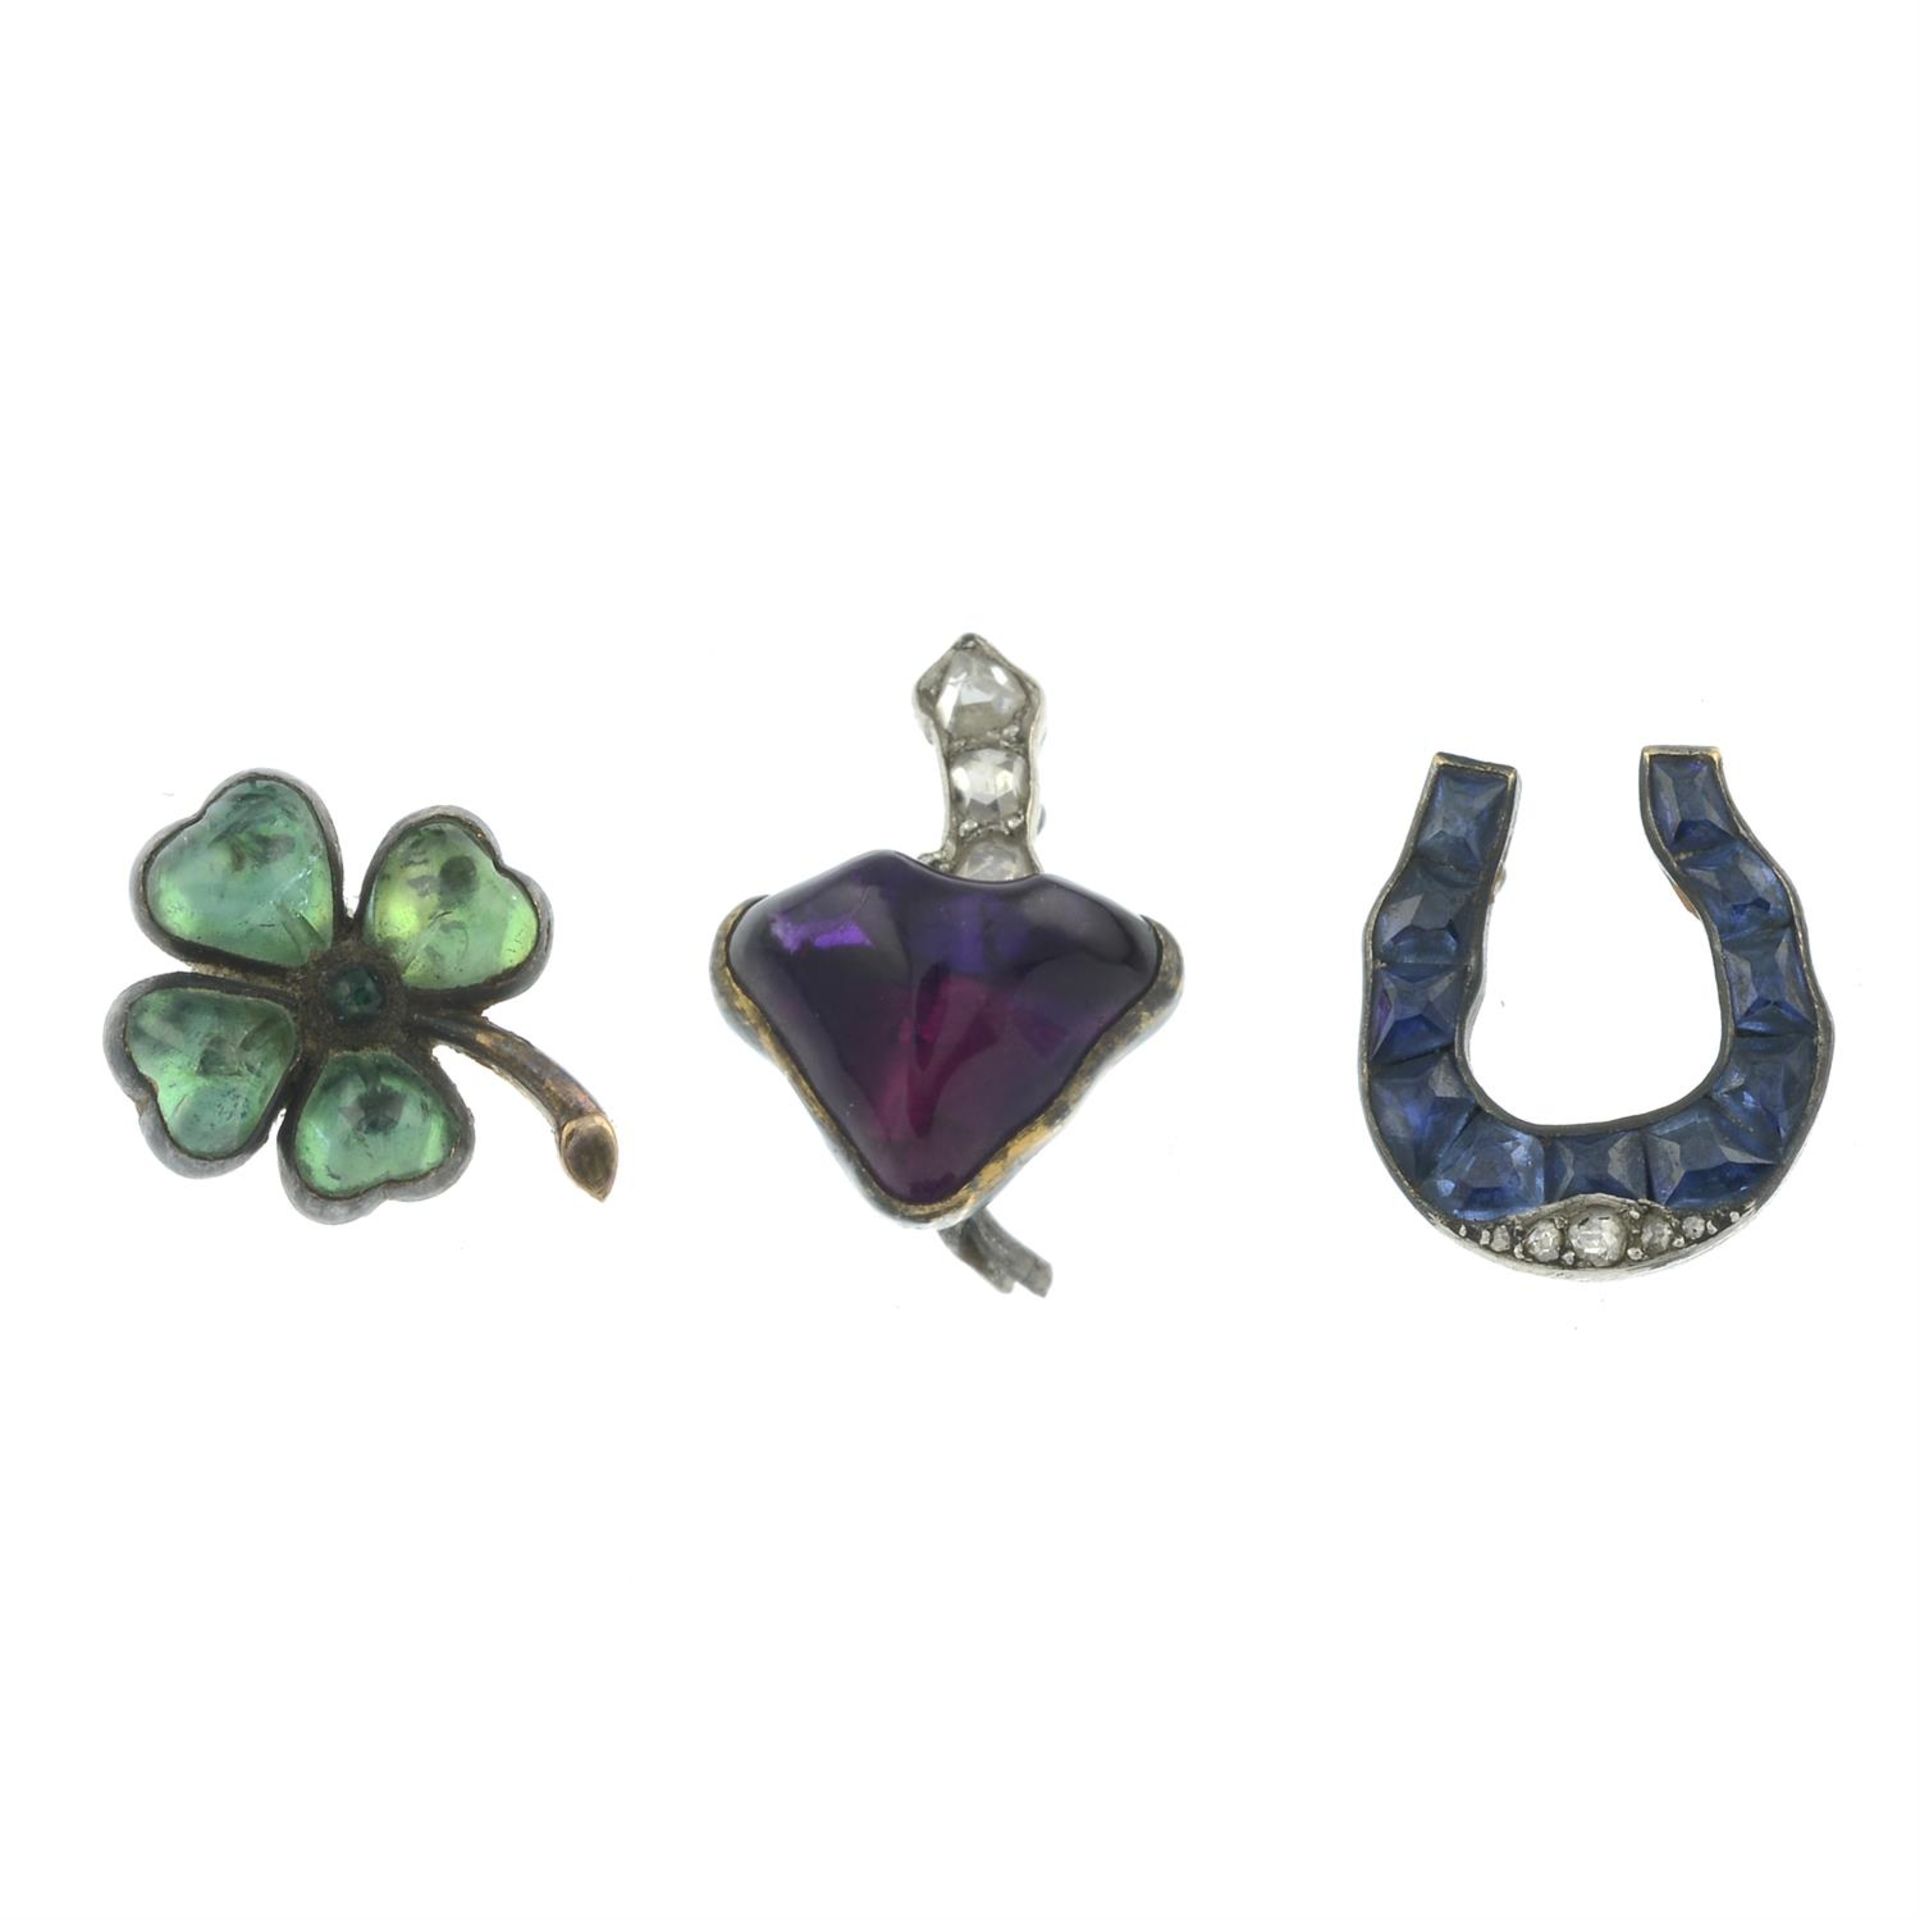 Three late 19th century diamond and foil-backed gem-set 'lucky charm' jewellery components.